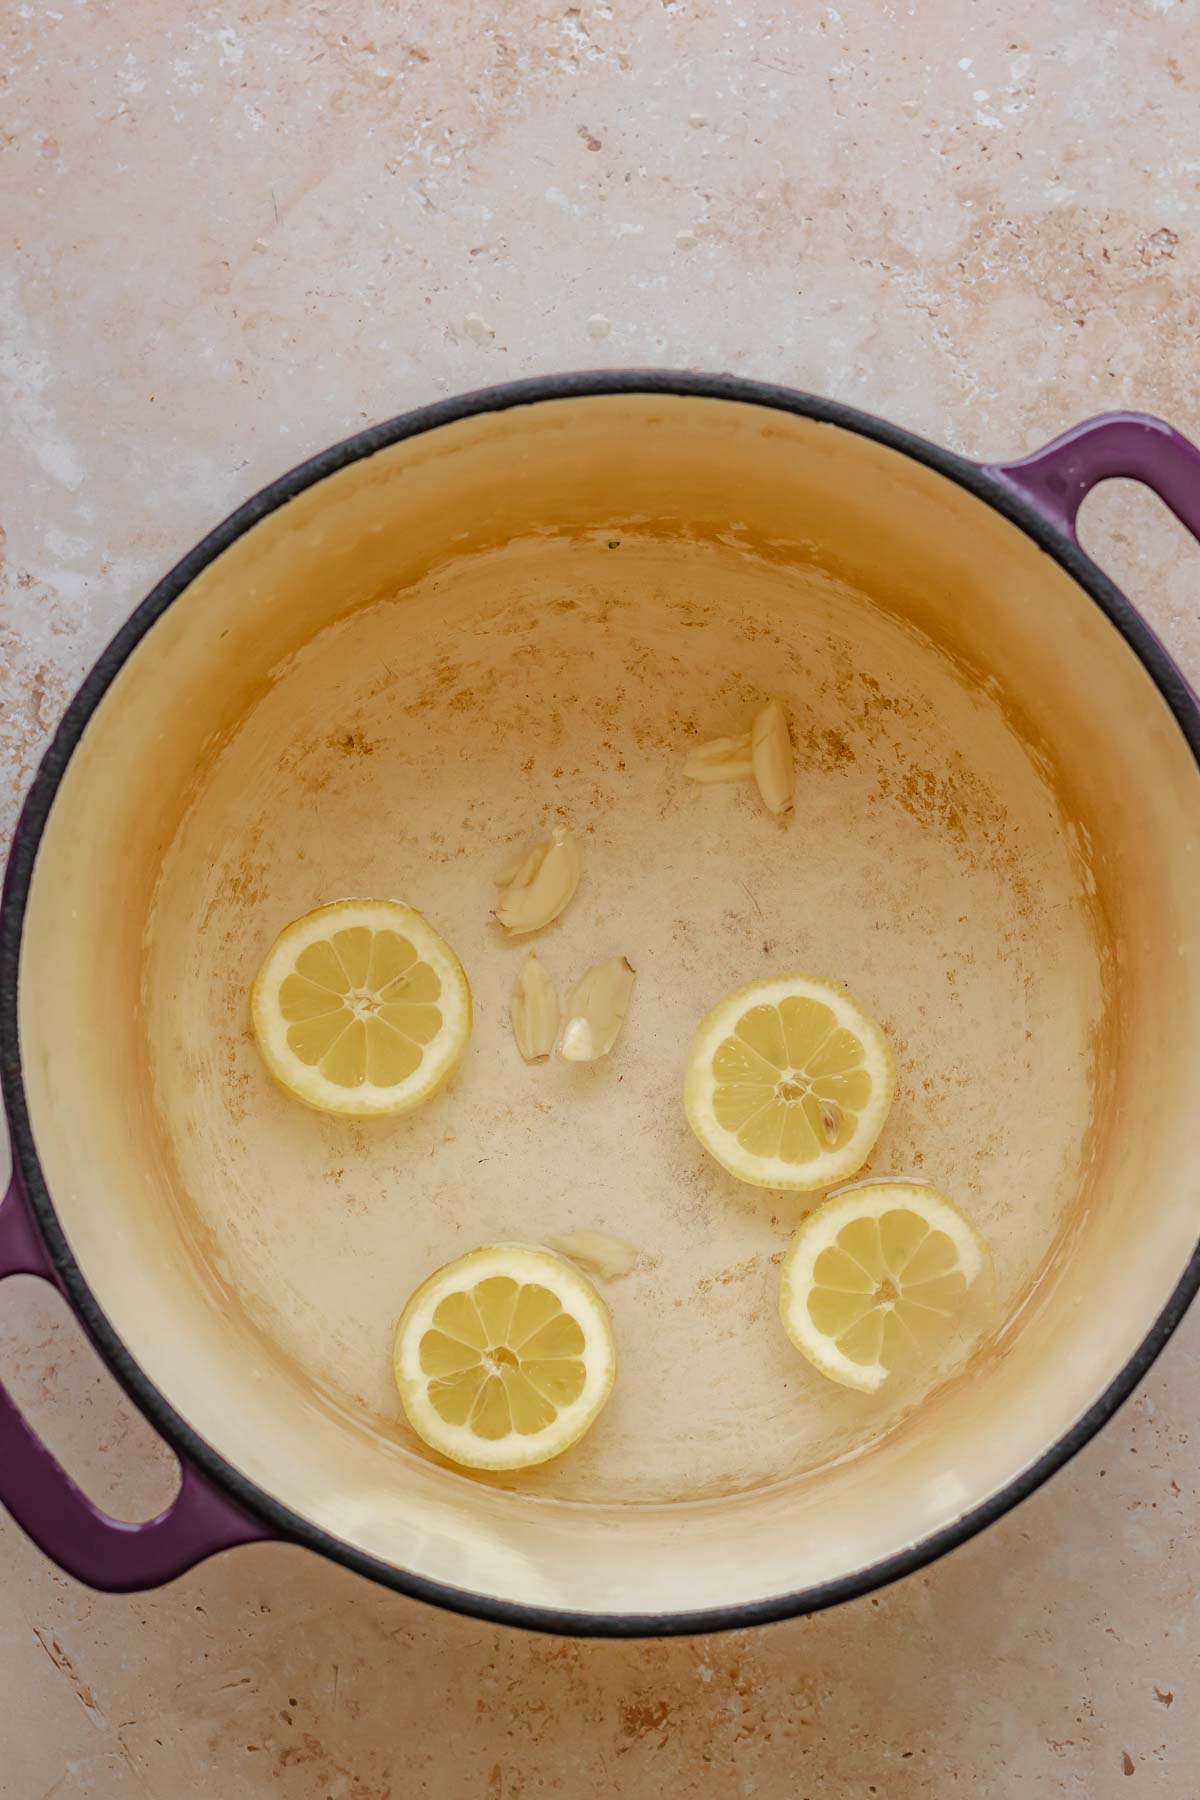 Lemon and garlic in water in a pot.